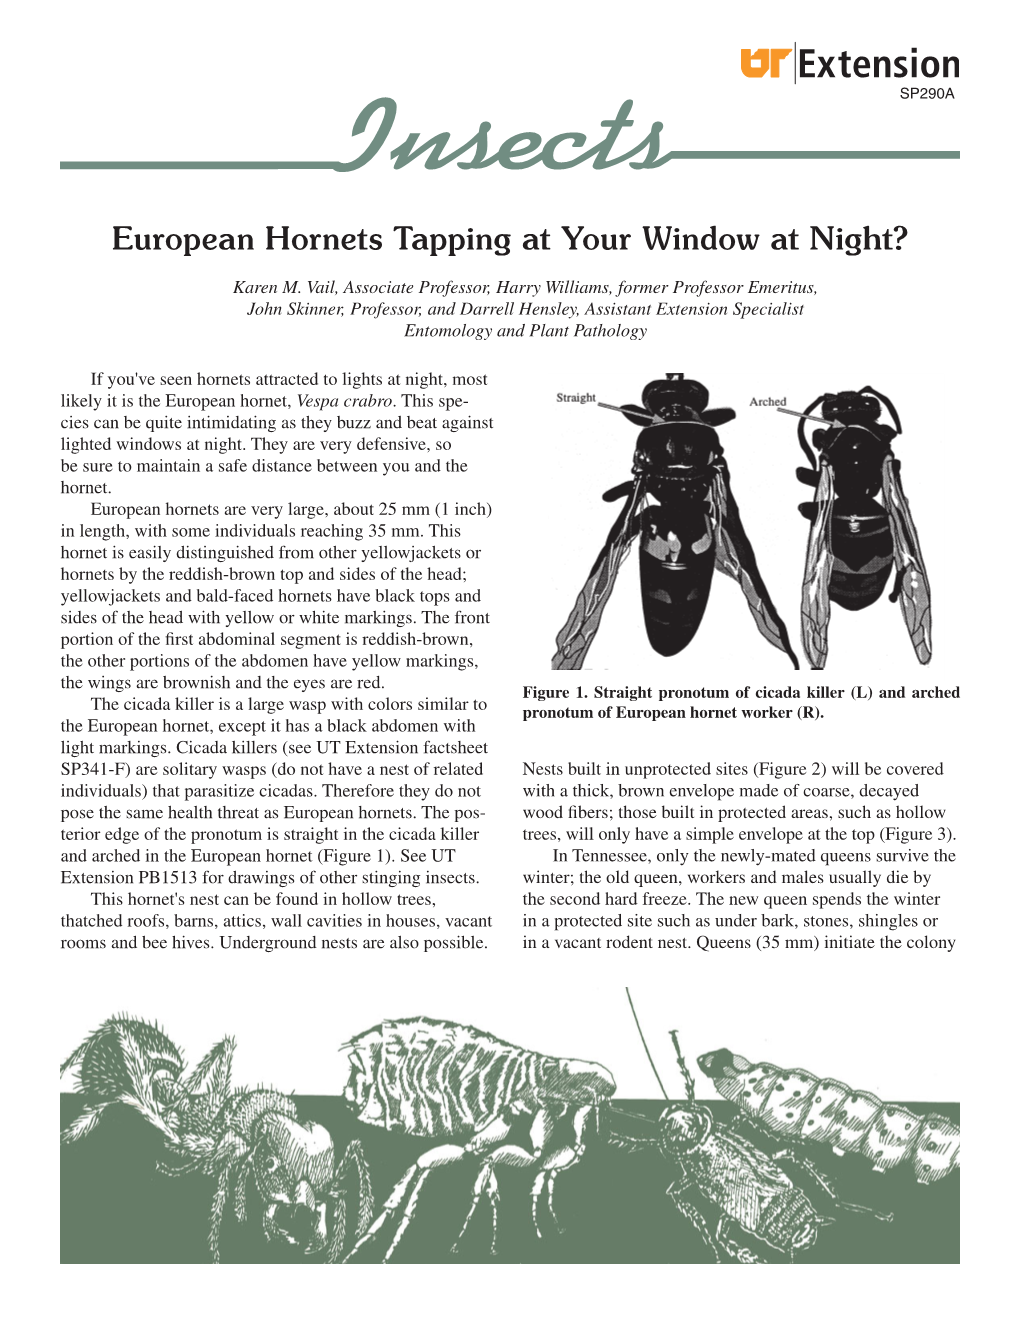 SP290-A European Hornets Tapping at Your Window at Night?